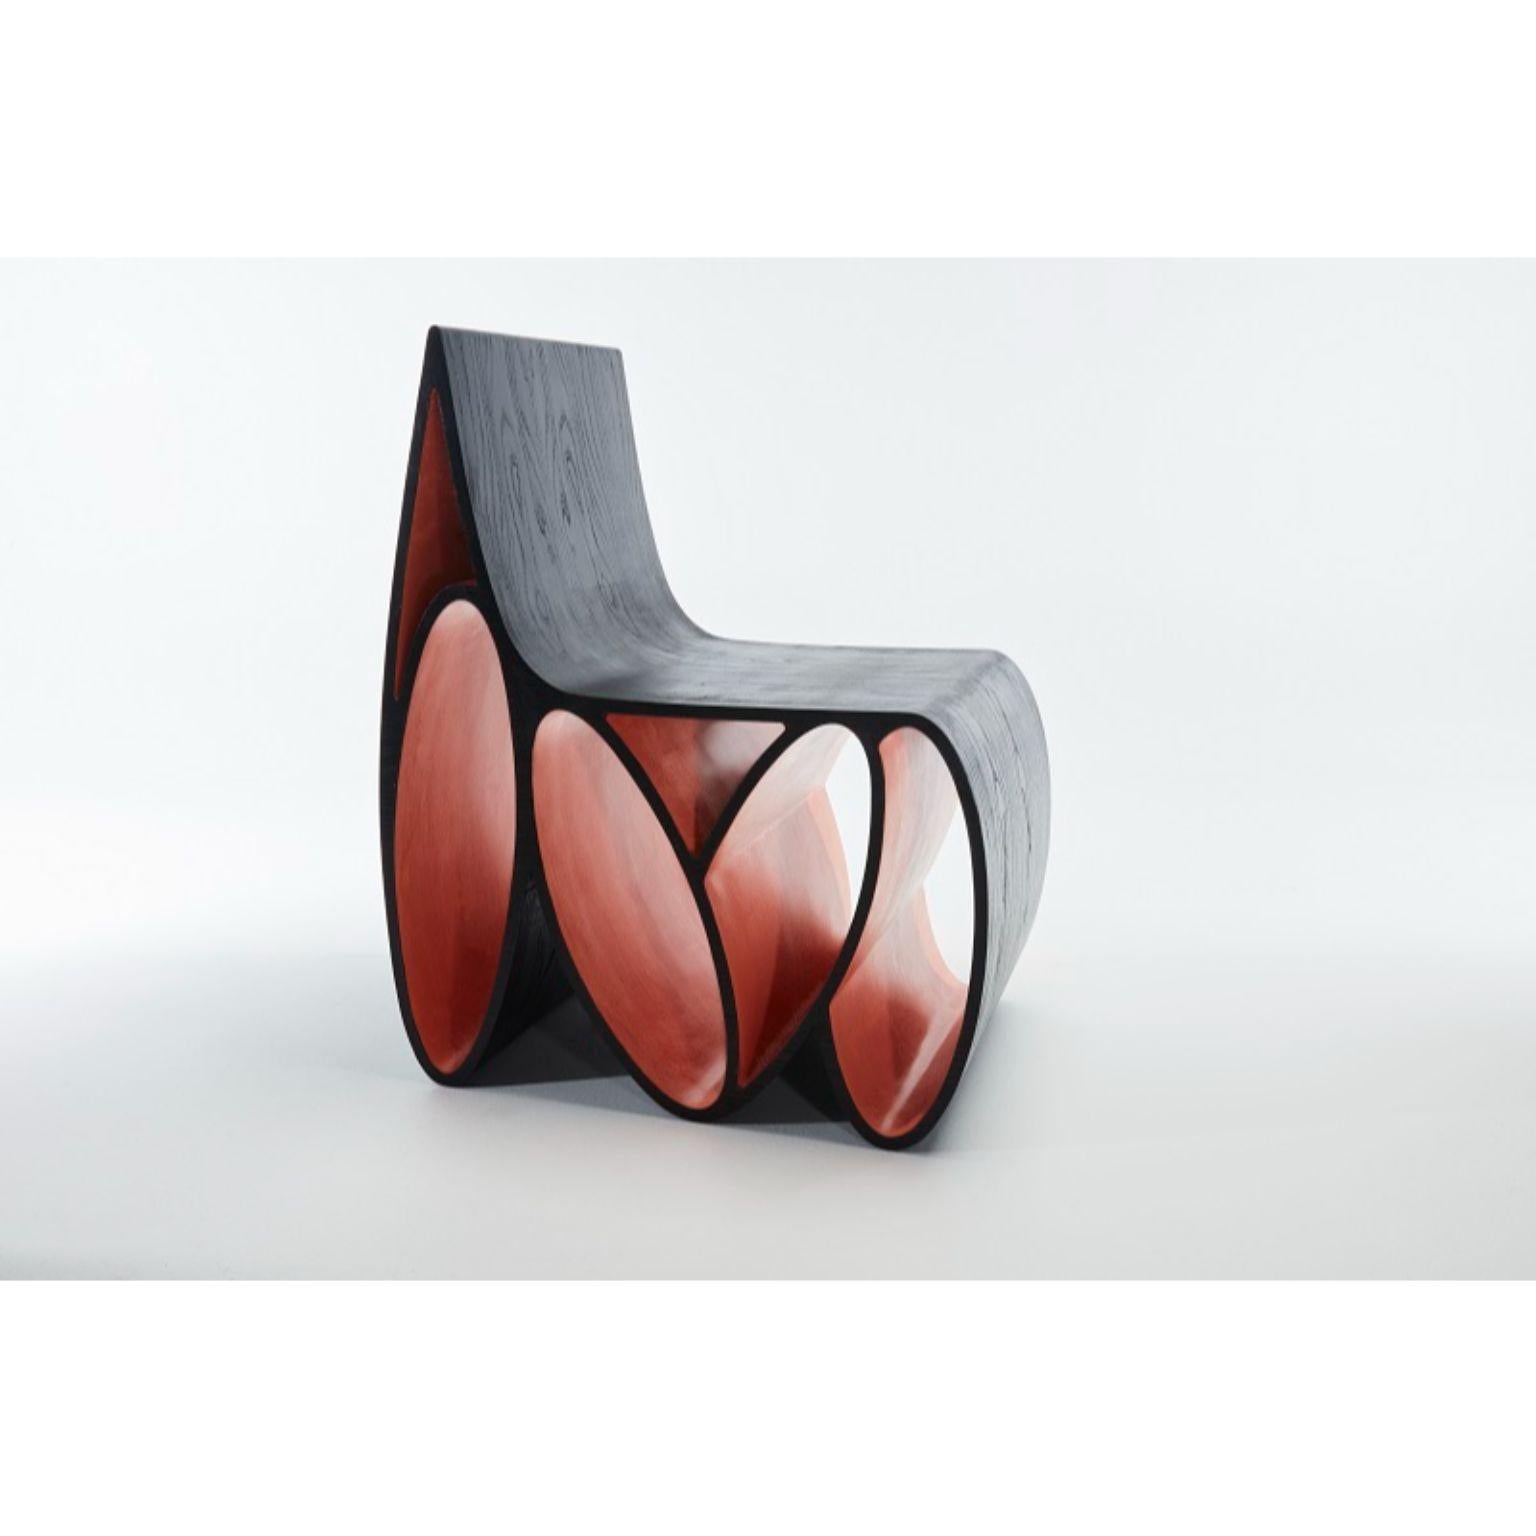 Loop chair by Jason Mizrahi
Dimensions: W63.5 x  D45.72 x  H78.64 cm
Materials: Ash

Stain/Color/Finish: Customized upon request.

Jason Mizrahi is a designer of contemporary furniture. He was born and raised in Los Angeles, California. After